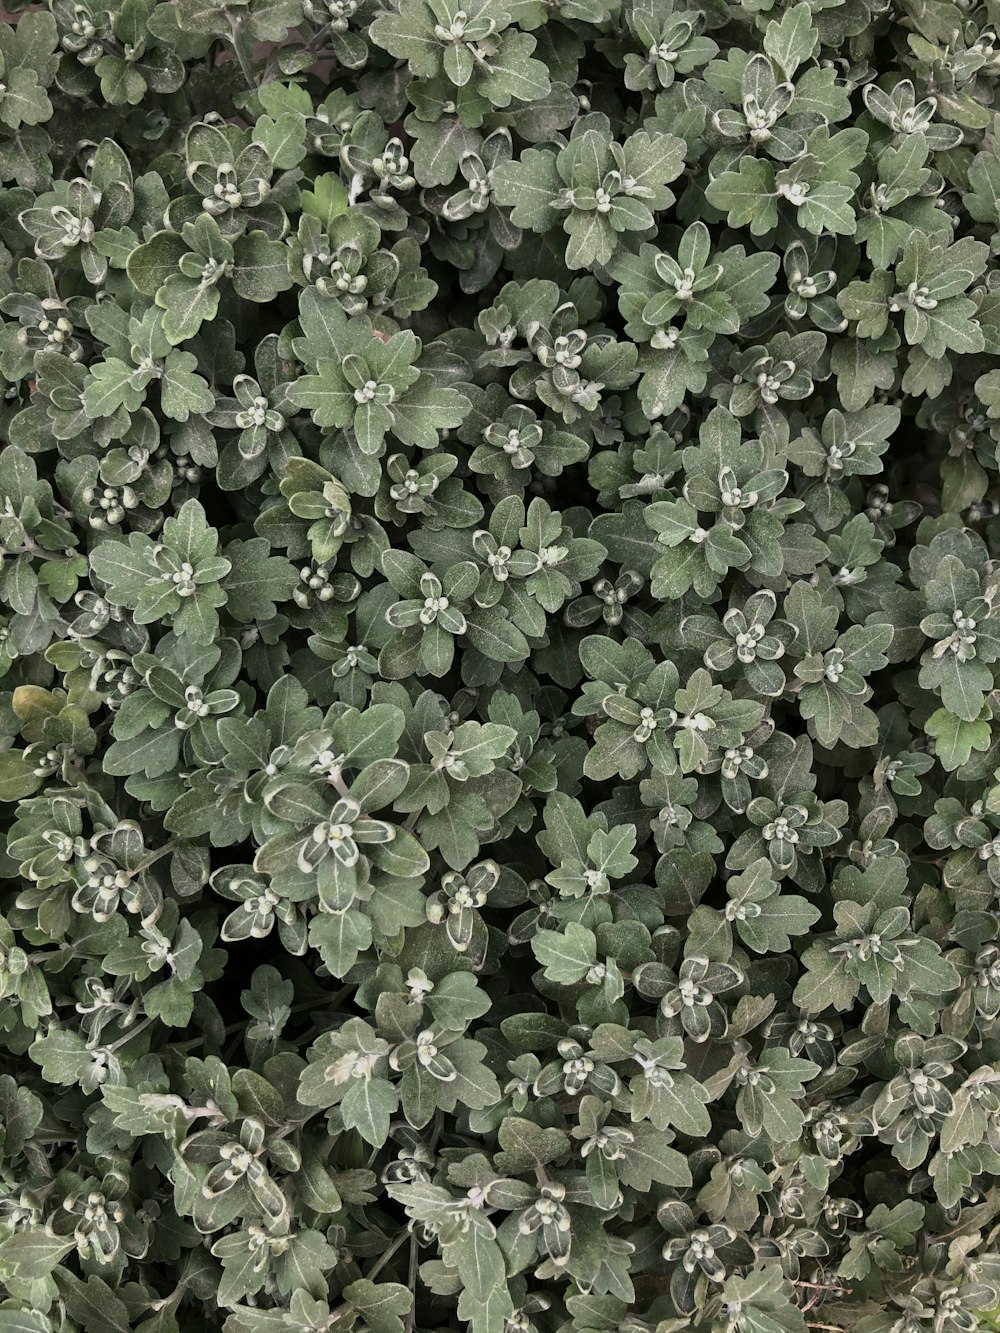 green plant with white flowers